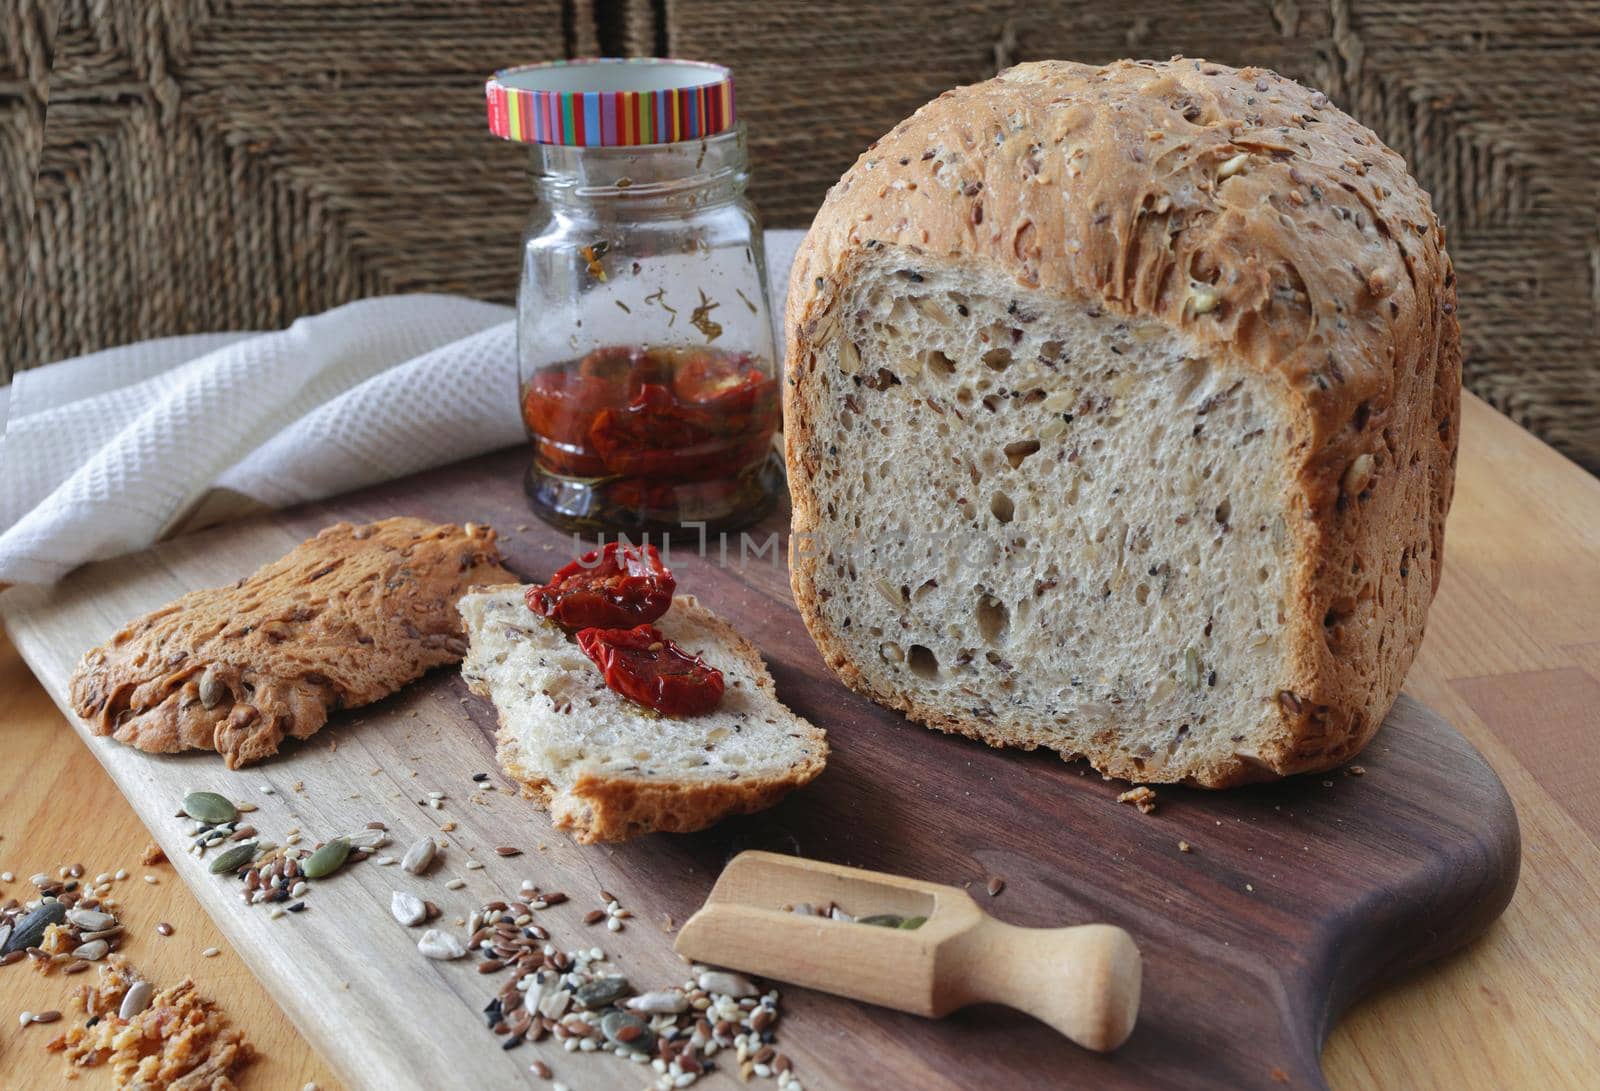 loaf of homemade whole grain bread and a cut slice of bread on a wooden cutting board. A mixture of seeds and whole grains. A jar of sun-dried tomatoes on a crust of fresh bread. Healthy food concept by Proxima13